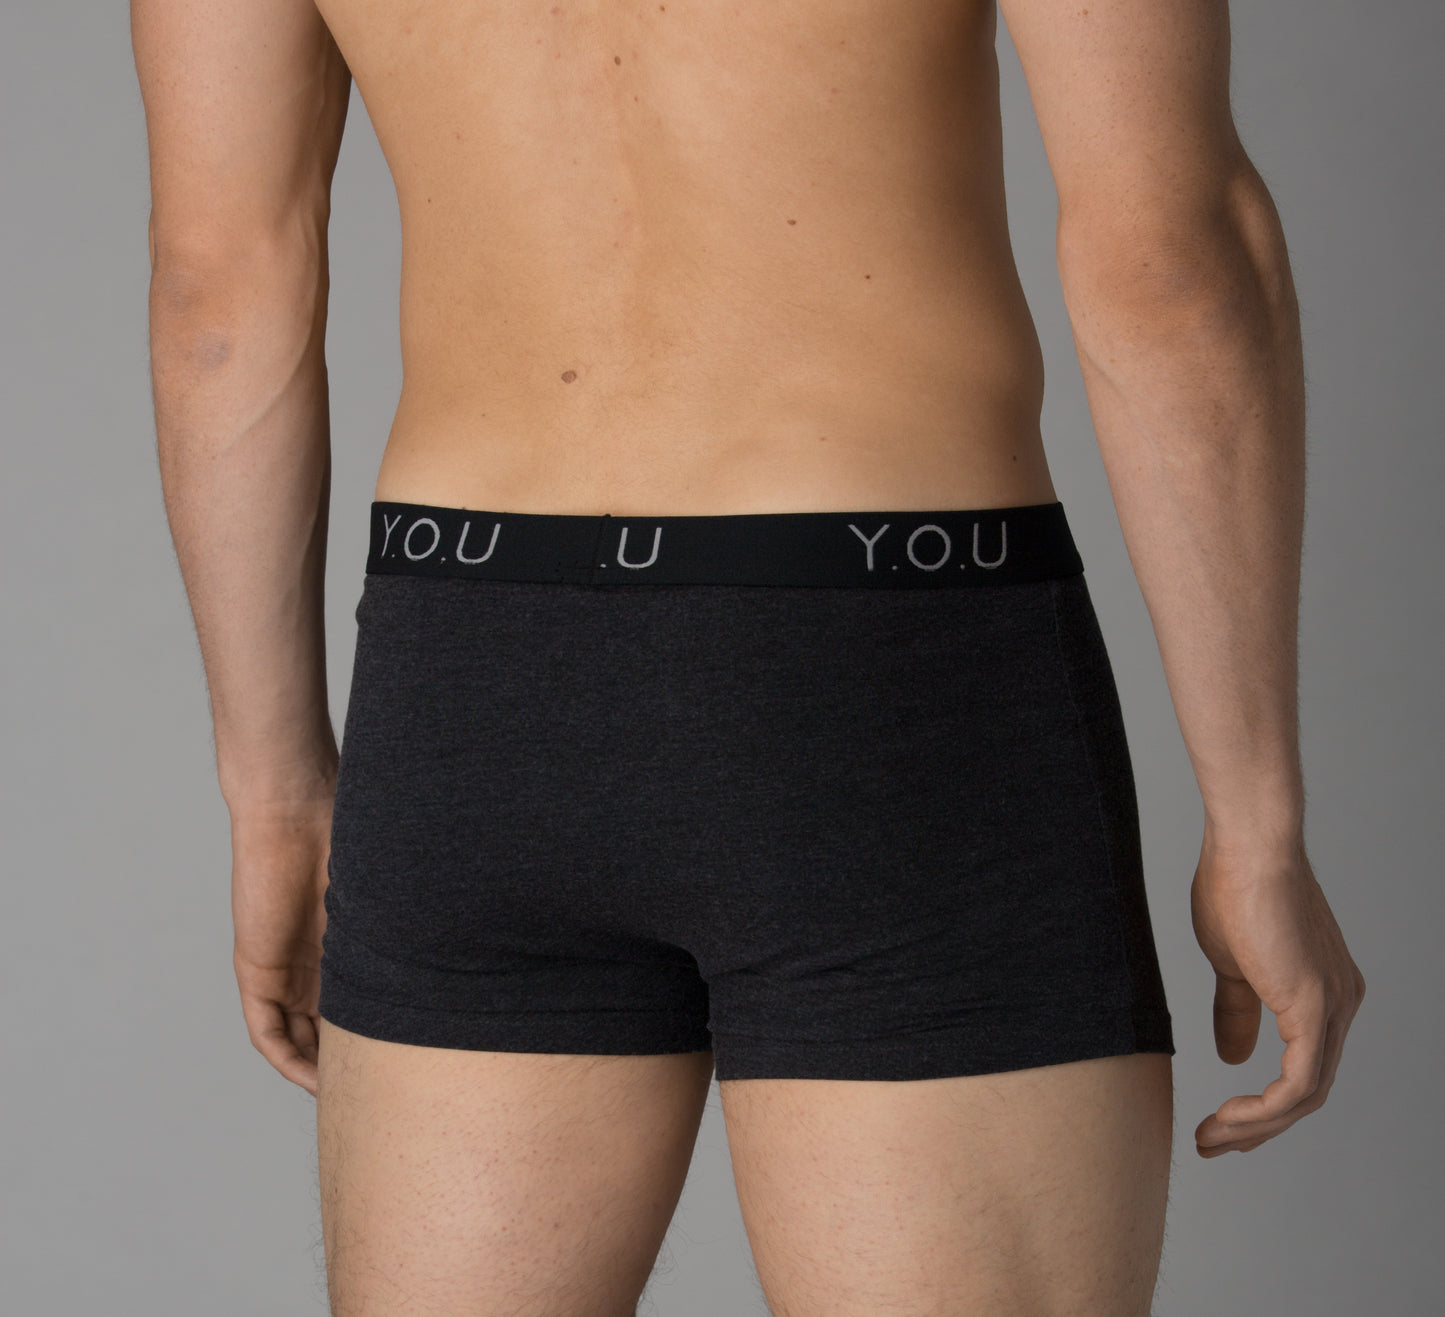 Men's charcoal grey trunks - back view